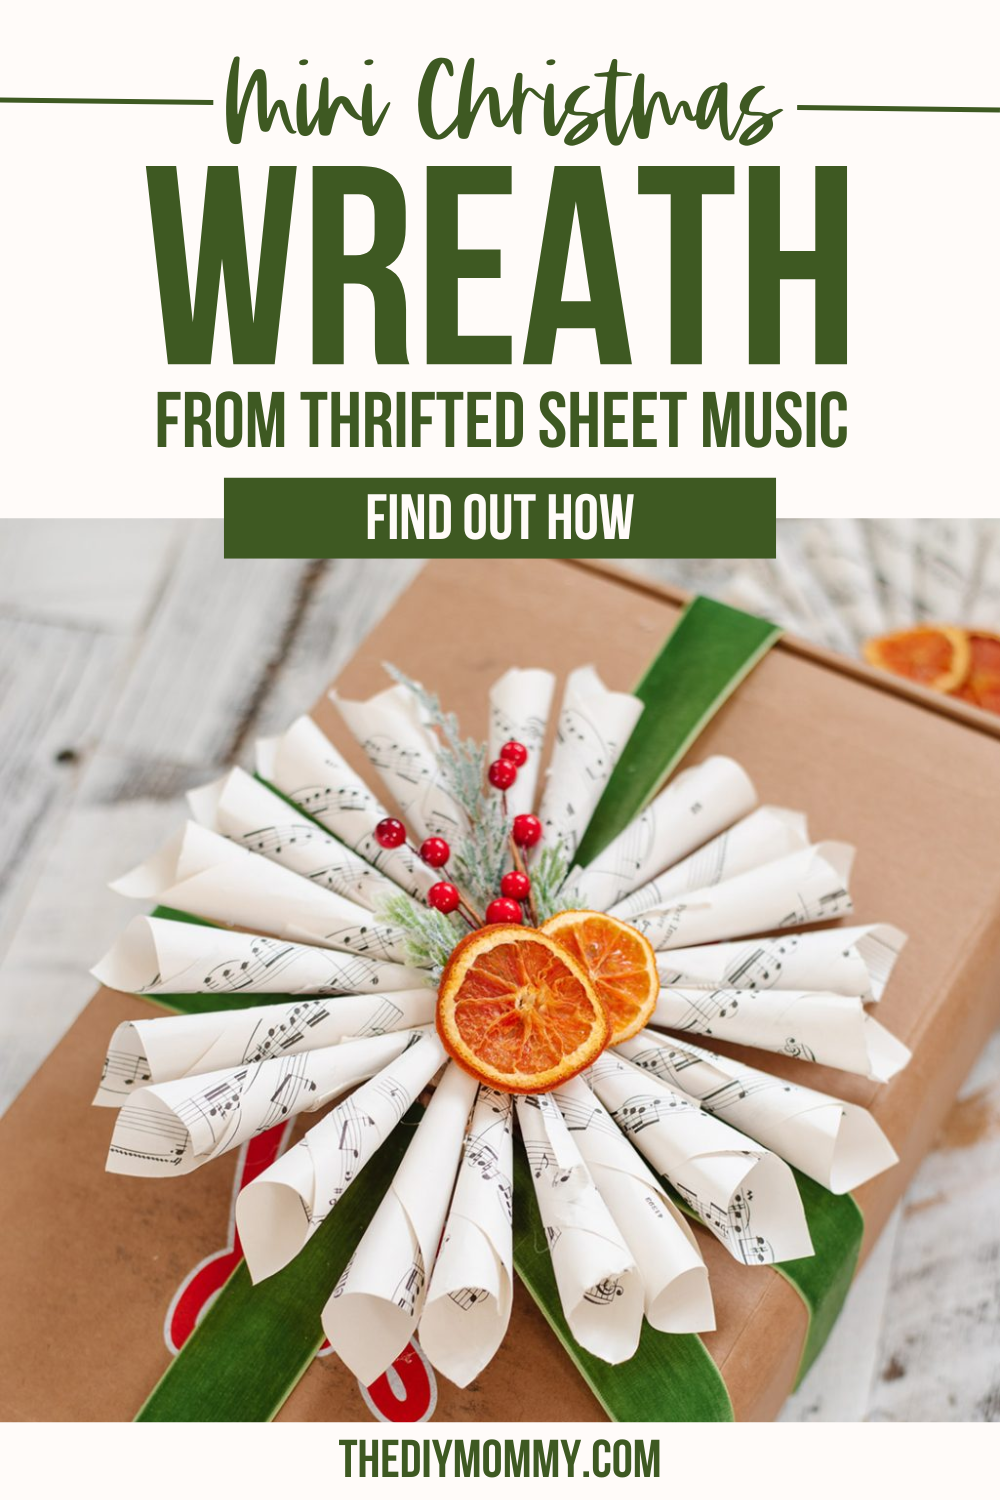 A mini wreath is made from sheet music and attached to a gift